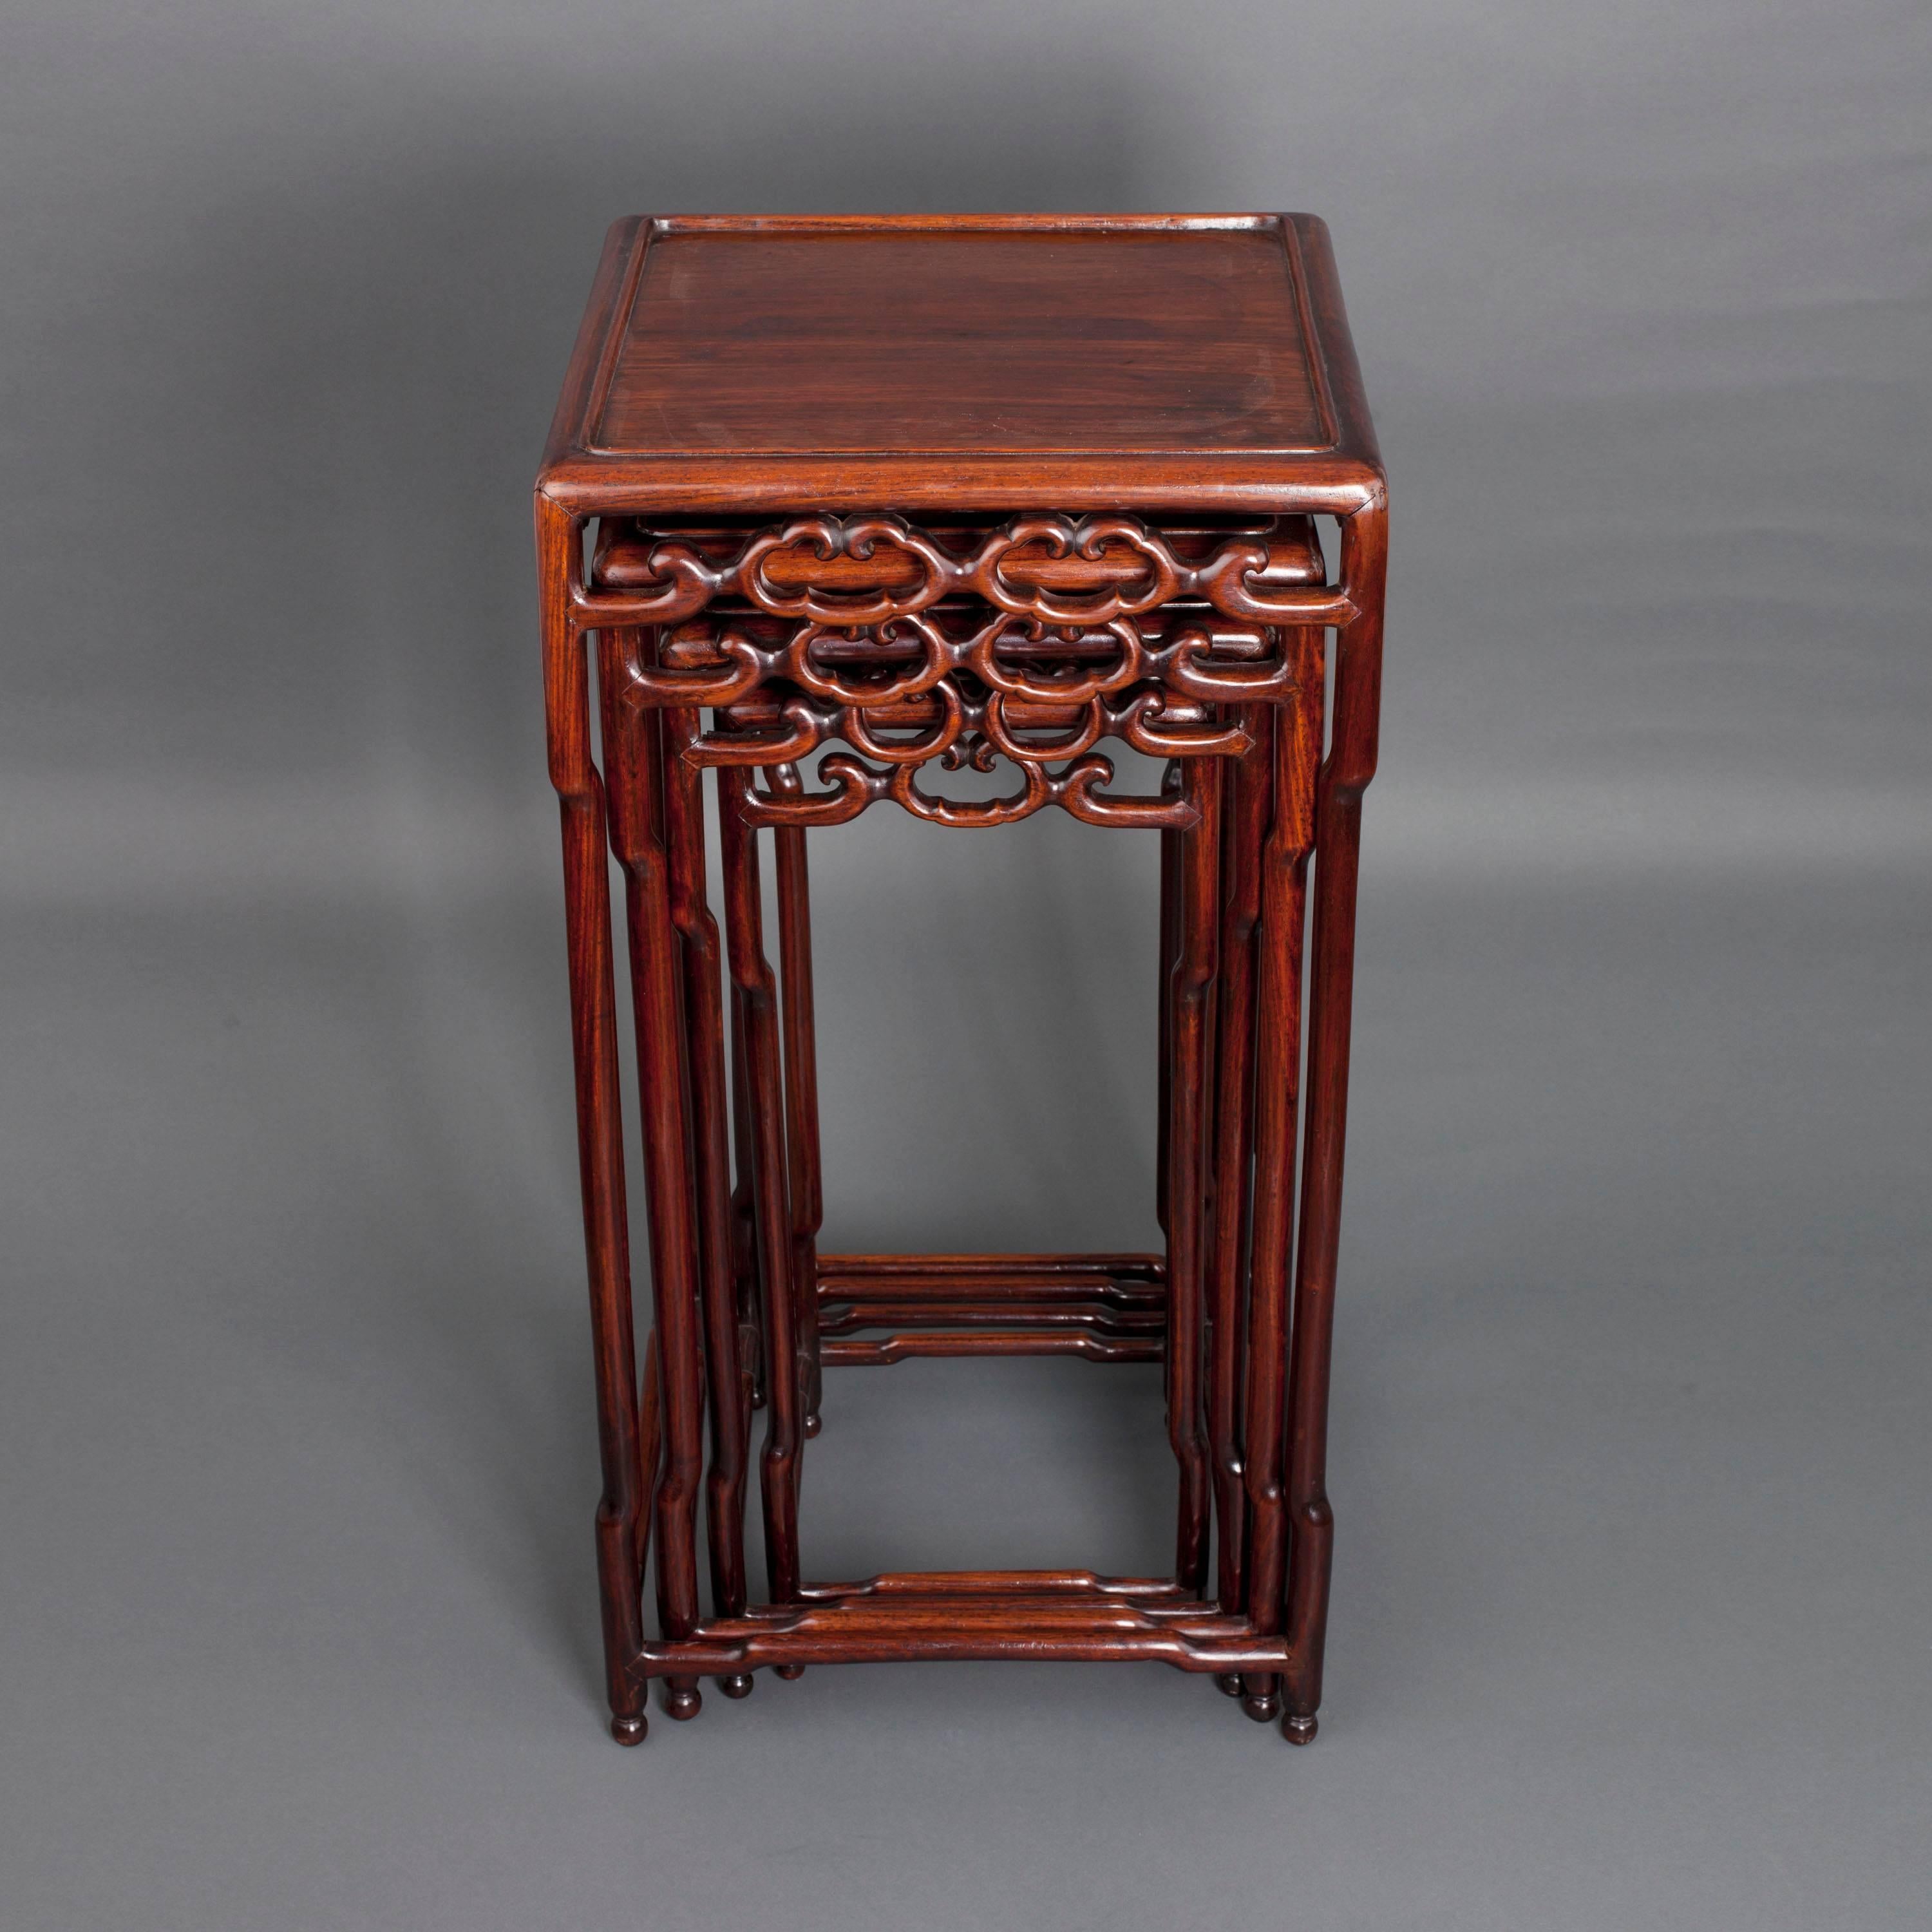 A Chinese hongmu nest of four square tables, the frieze in the form of open ruyi-heads, the tubular legs and lower cross joins with raised sections,

circa 1900.

Measure: 73 cm high, 37 cm wide, 37 cm deep.